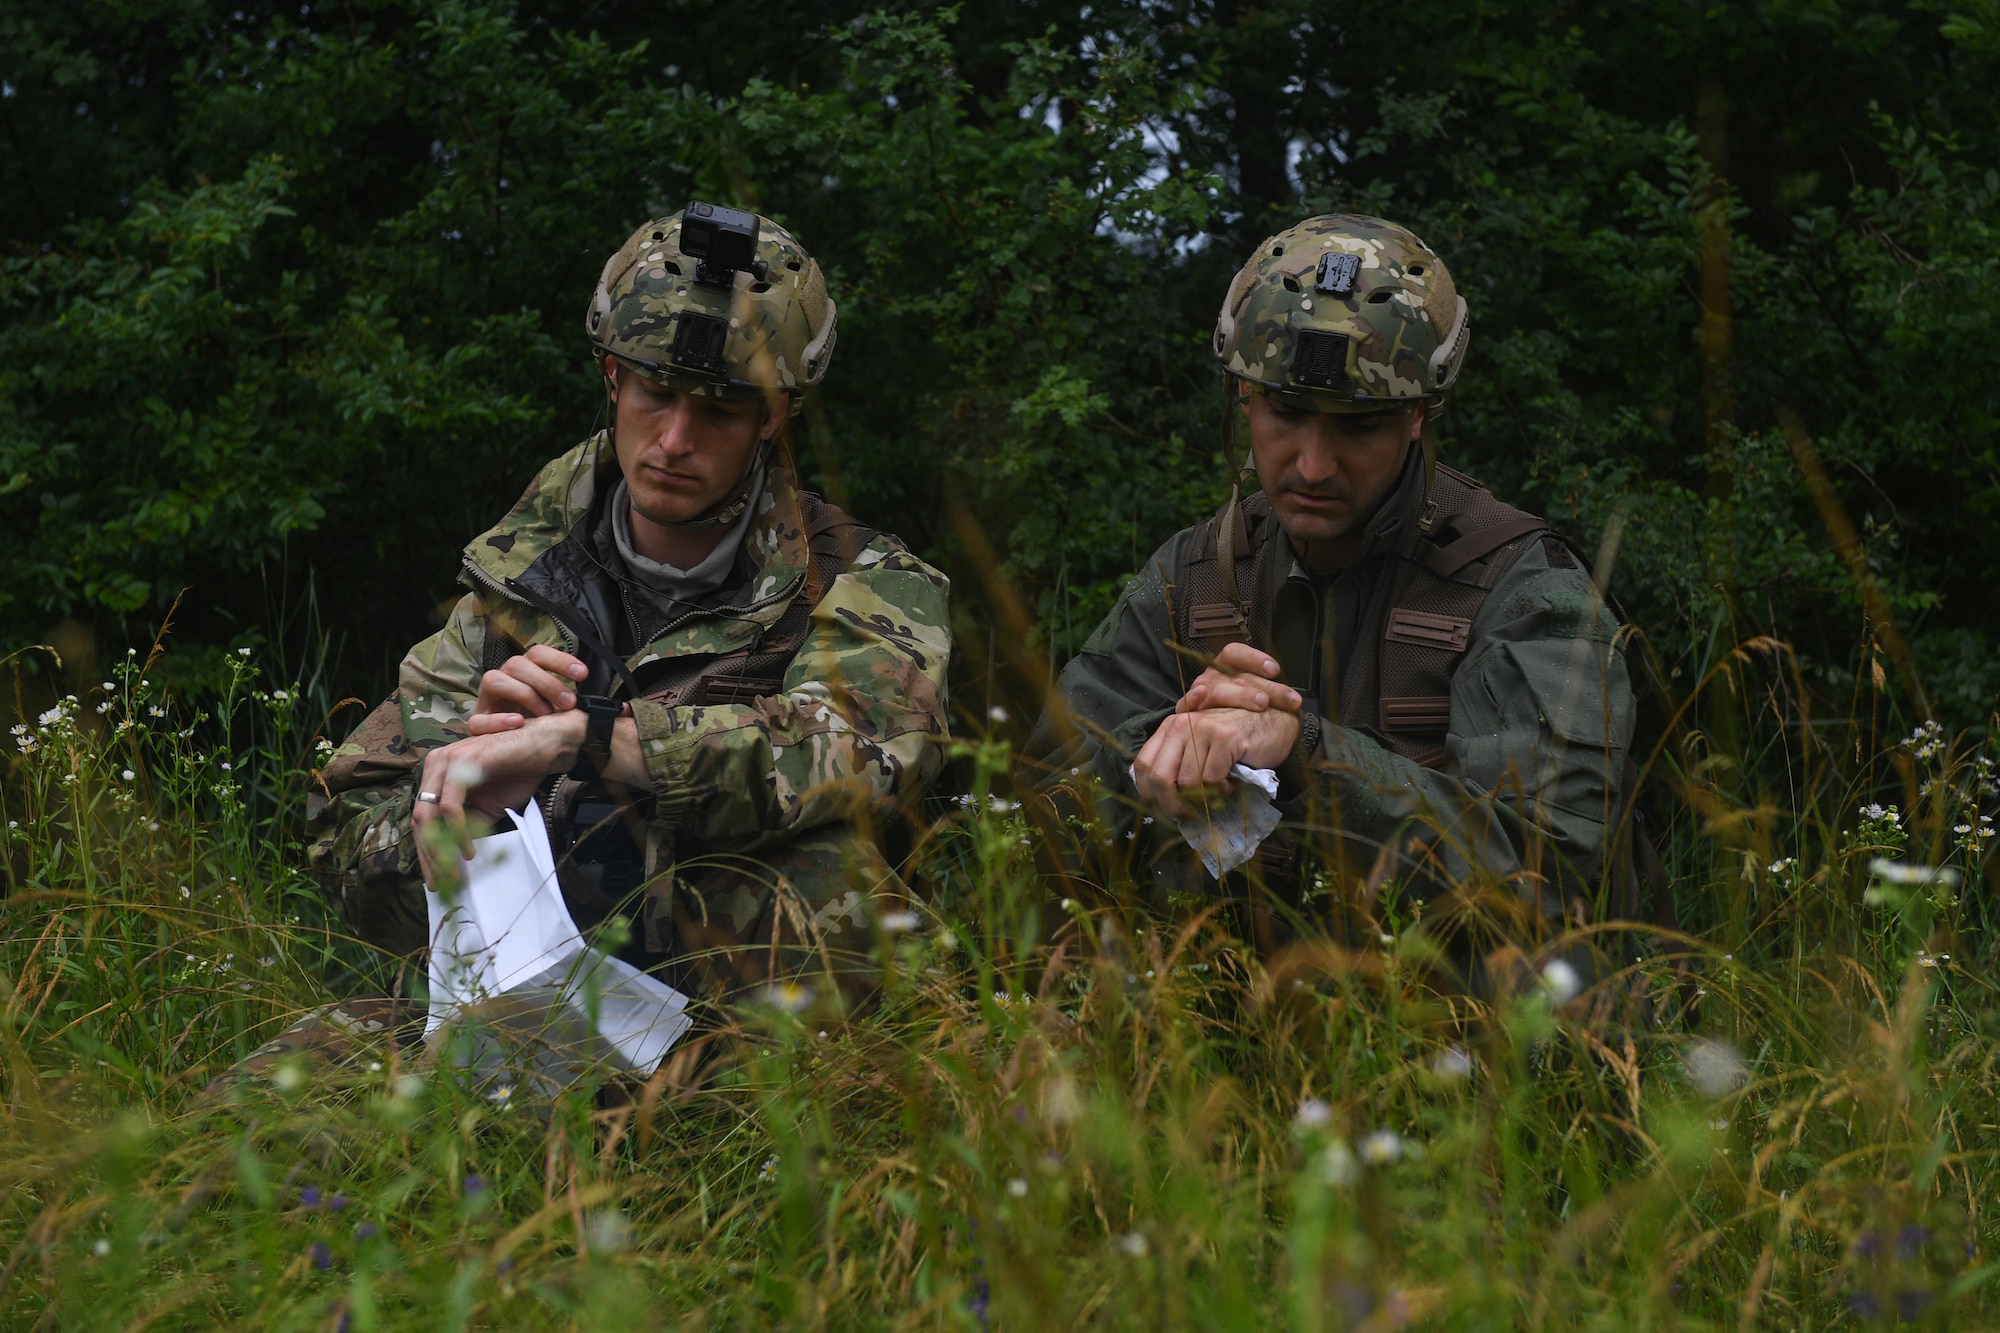 U.S. Air Force Capt. James Gregory, 510th Fighter Squadron pilot and Maj. Matthew Robins, 555th Fighter Squadron pilot, use their radios during an exercise at Rivolto Air Base, Italy, June 10, 2020. The pilots were undergoing a simulated Survival, Evasion, Resistance, Escape (SERE) training in which they had to survive and make contact with the proper sources after landing in enemy territory. (U.S. Air Force photo by Airman 1st Class Thomas S. Keisler IV)